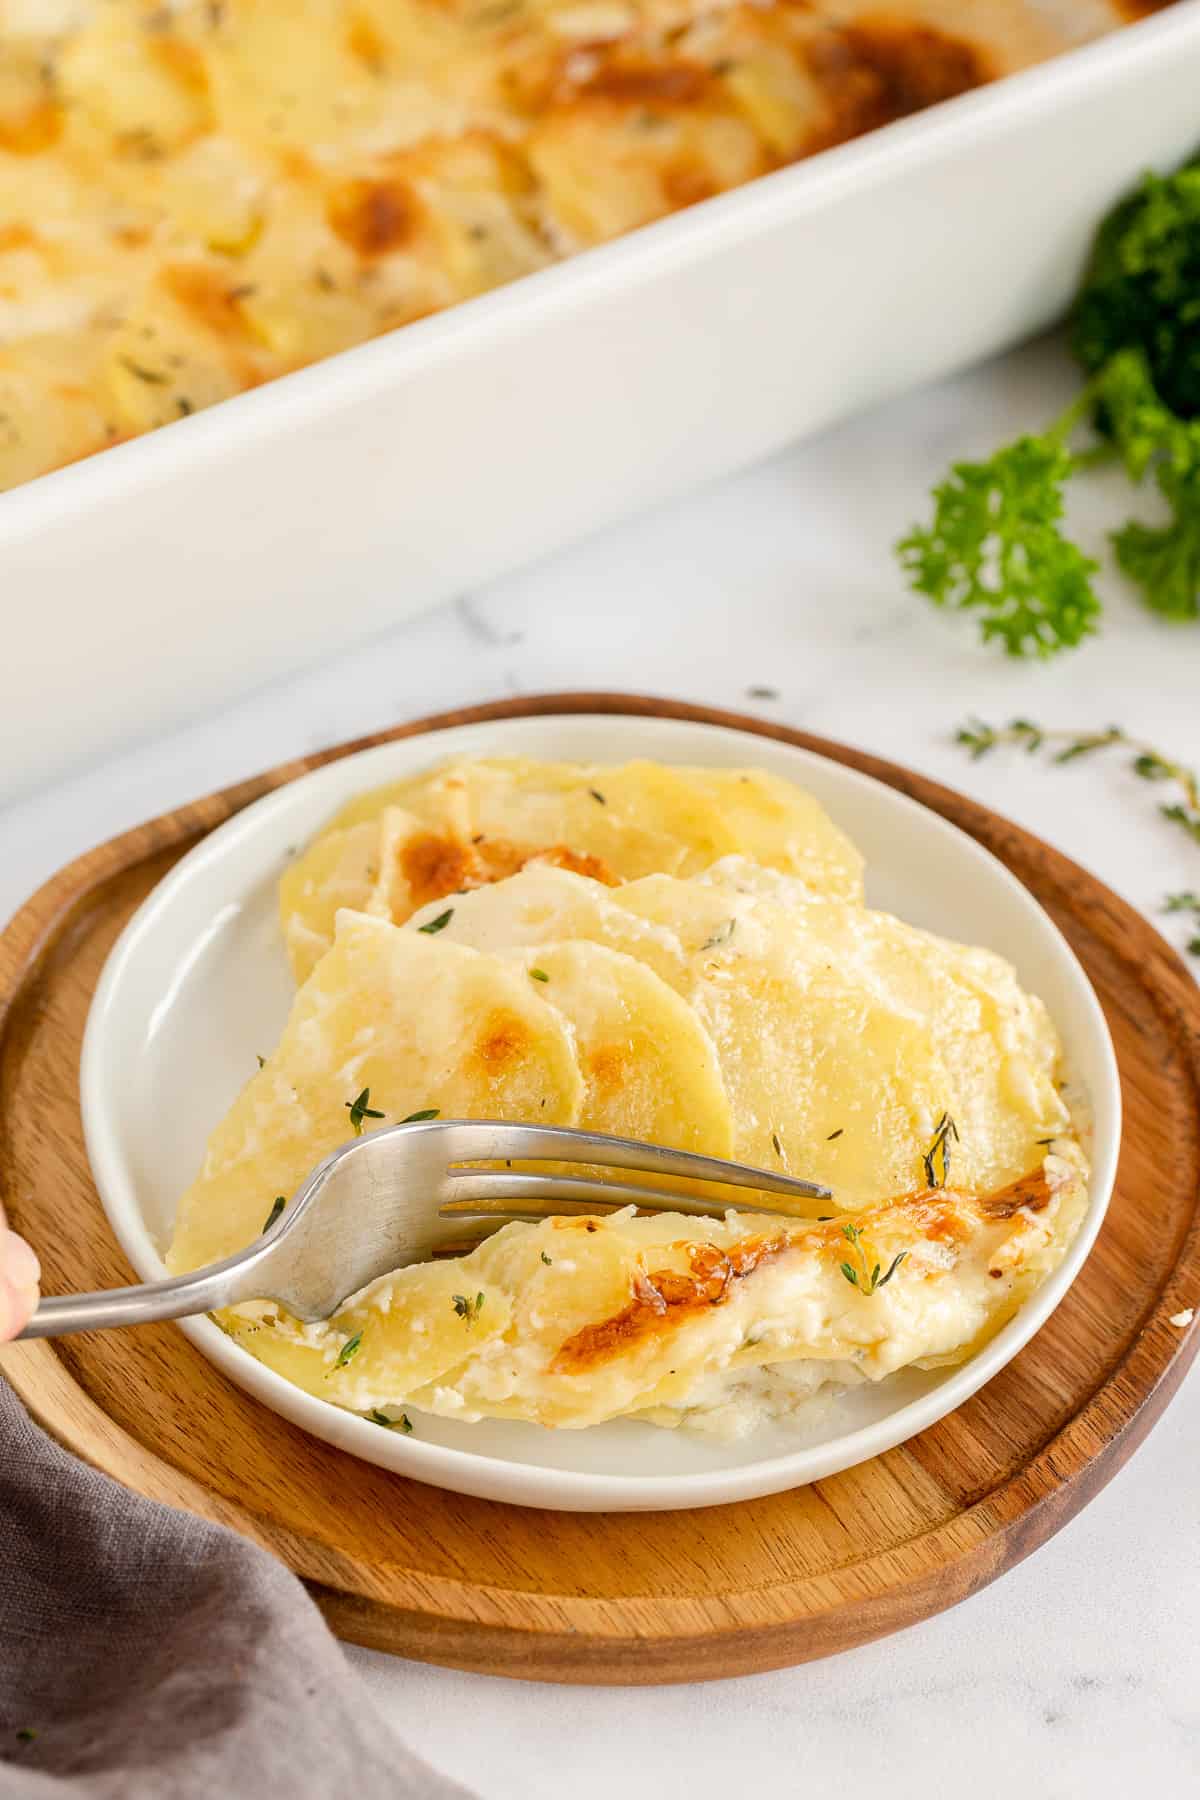 A fork breaks into a serving of scalloped potatoes on a small white plate.